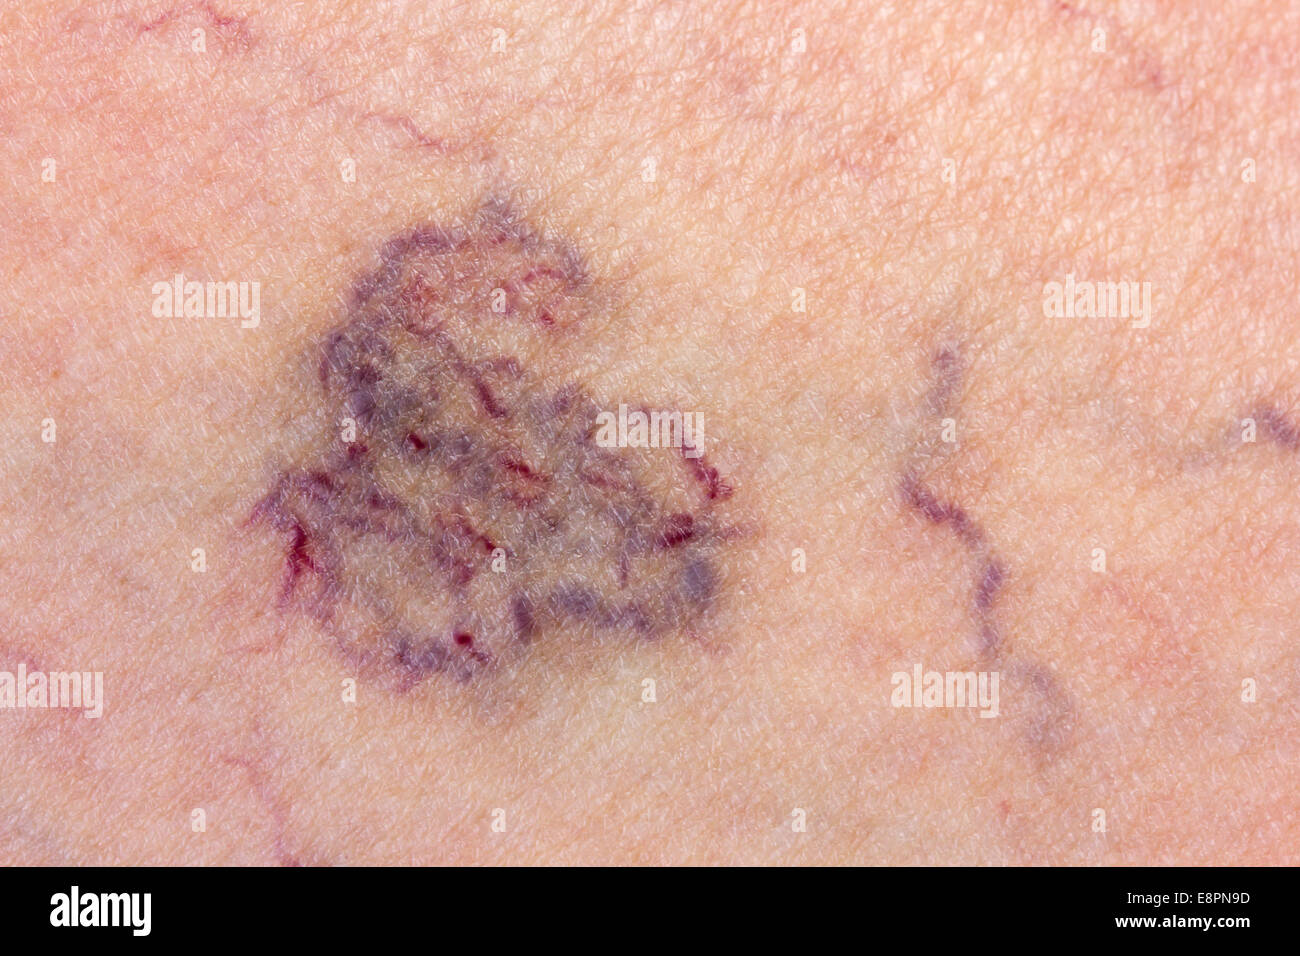 Close-up of skin with varicose veins Stock Photo